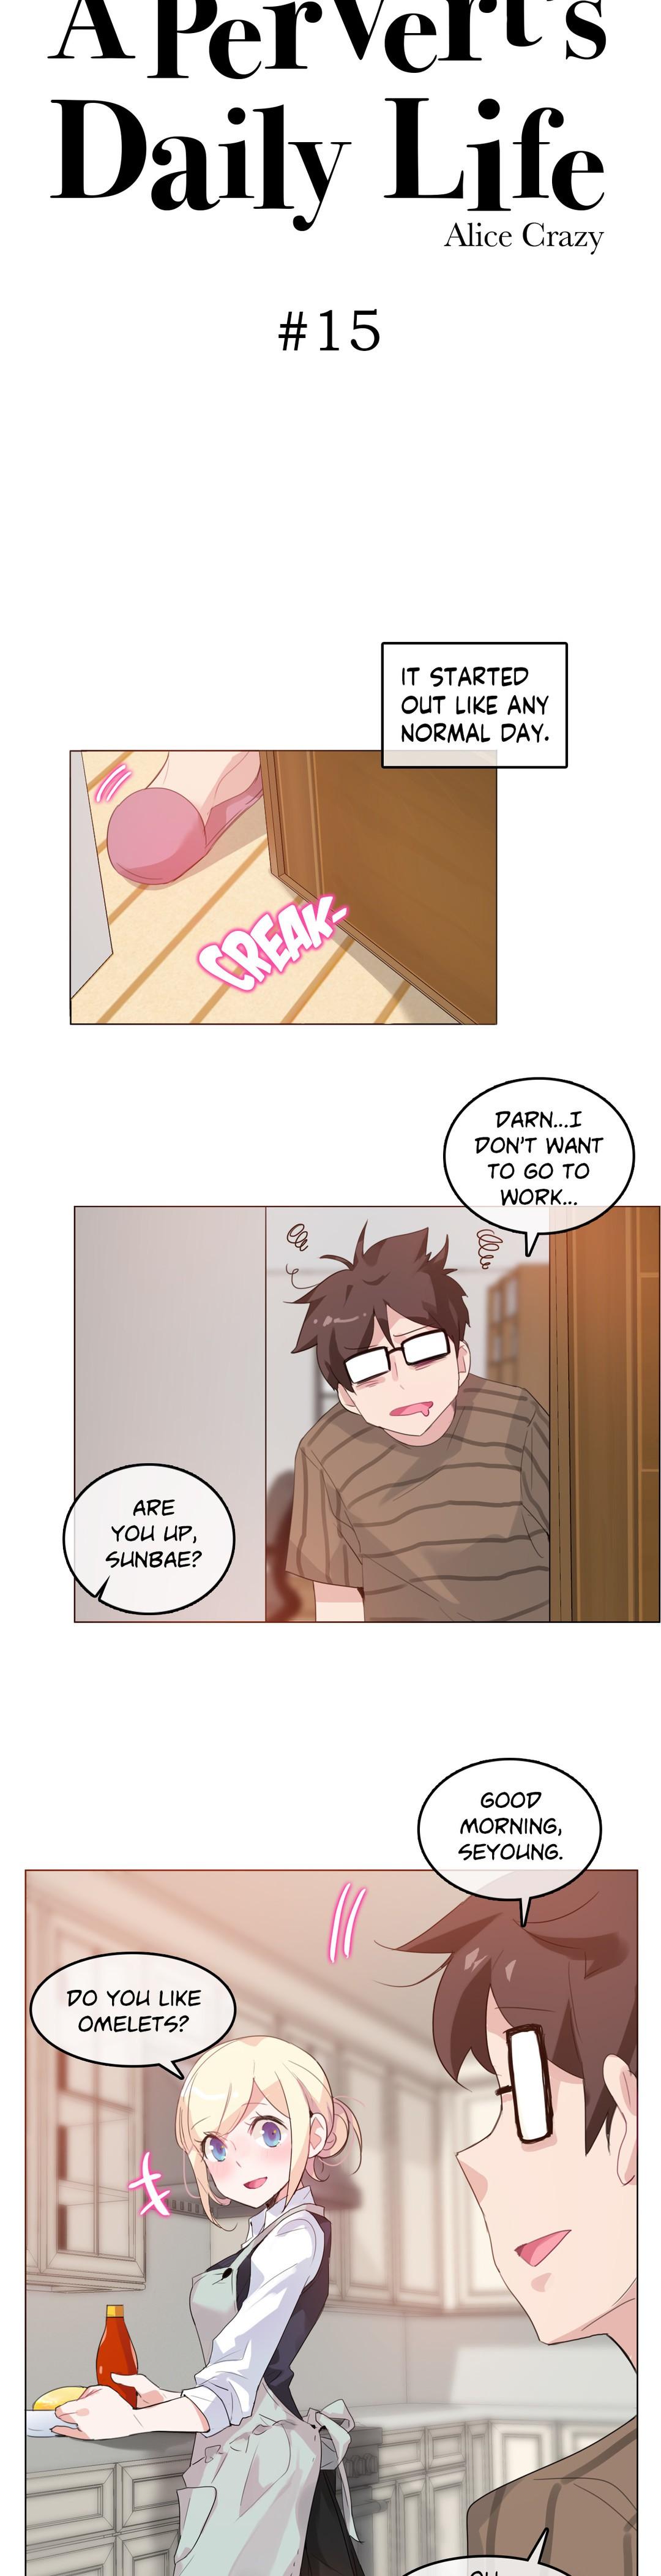 A Pervert's Daily Life Ch. 1-34 309